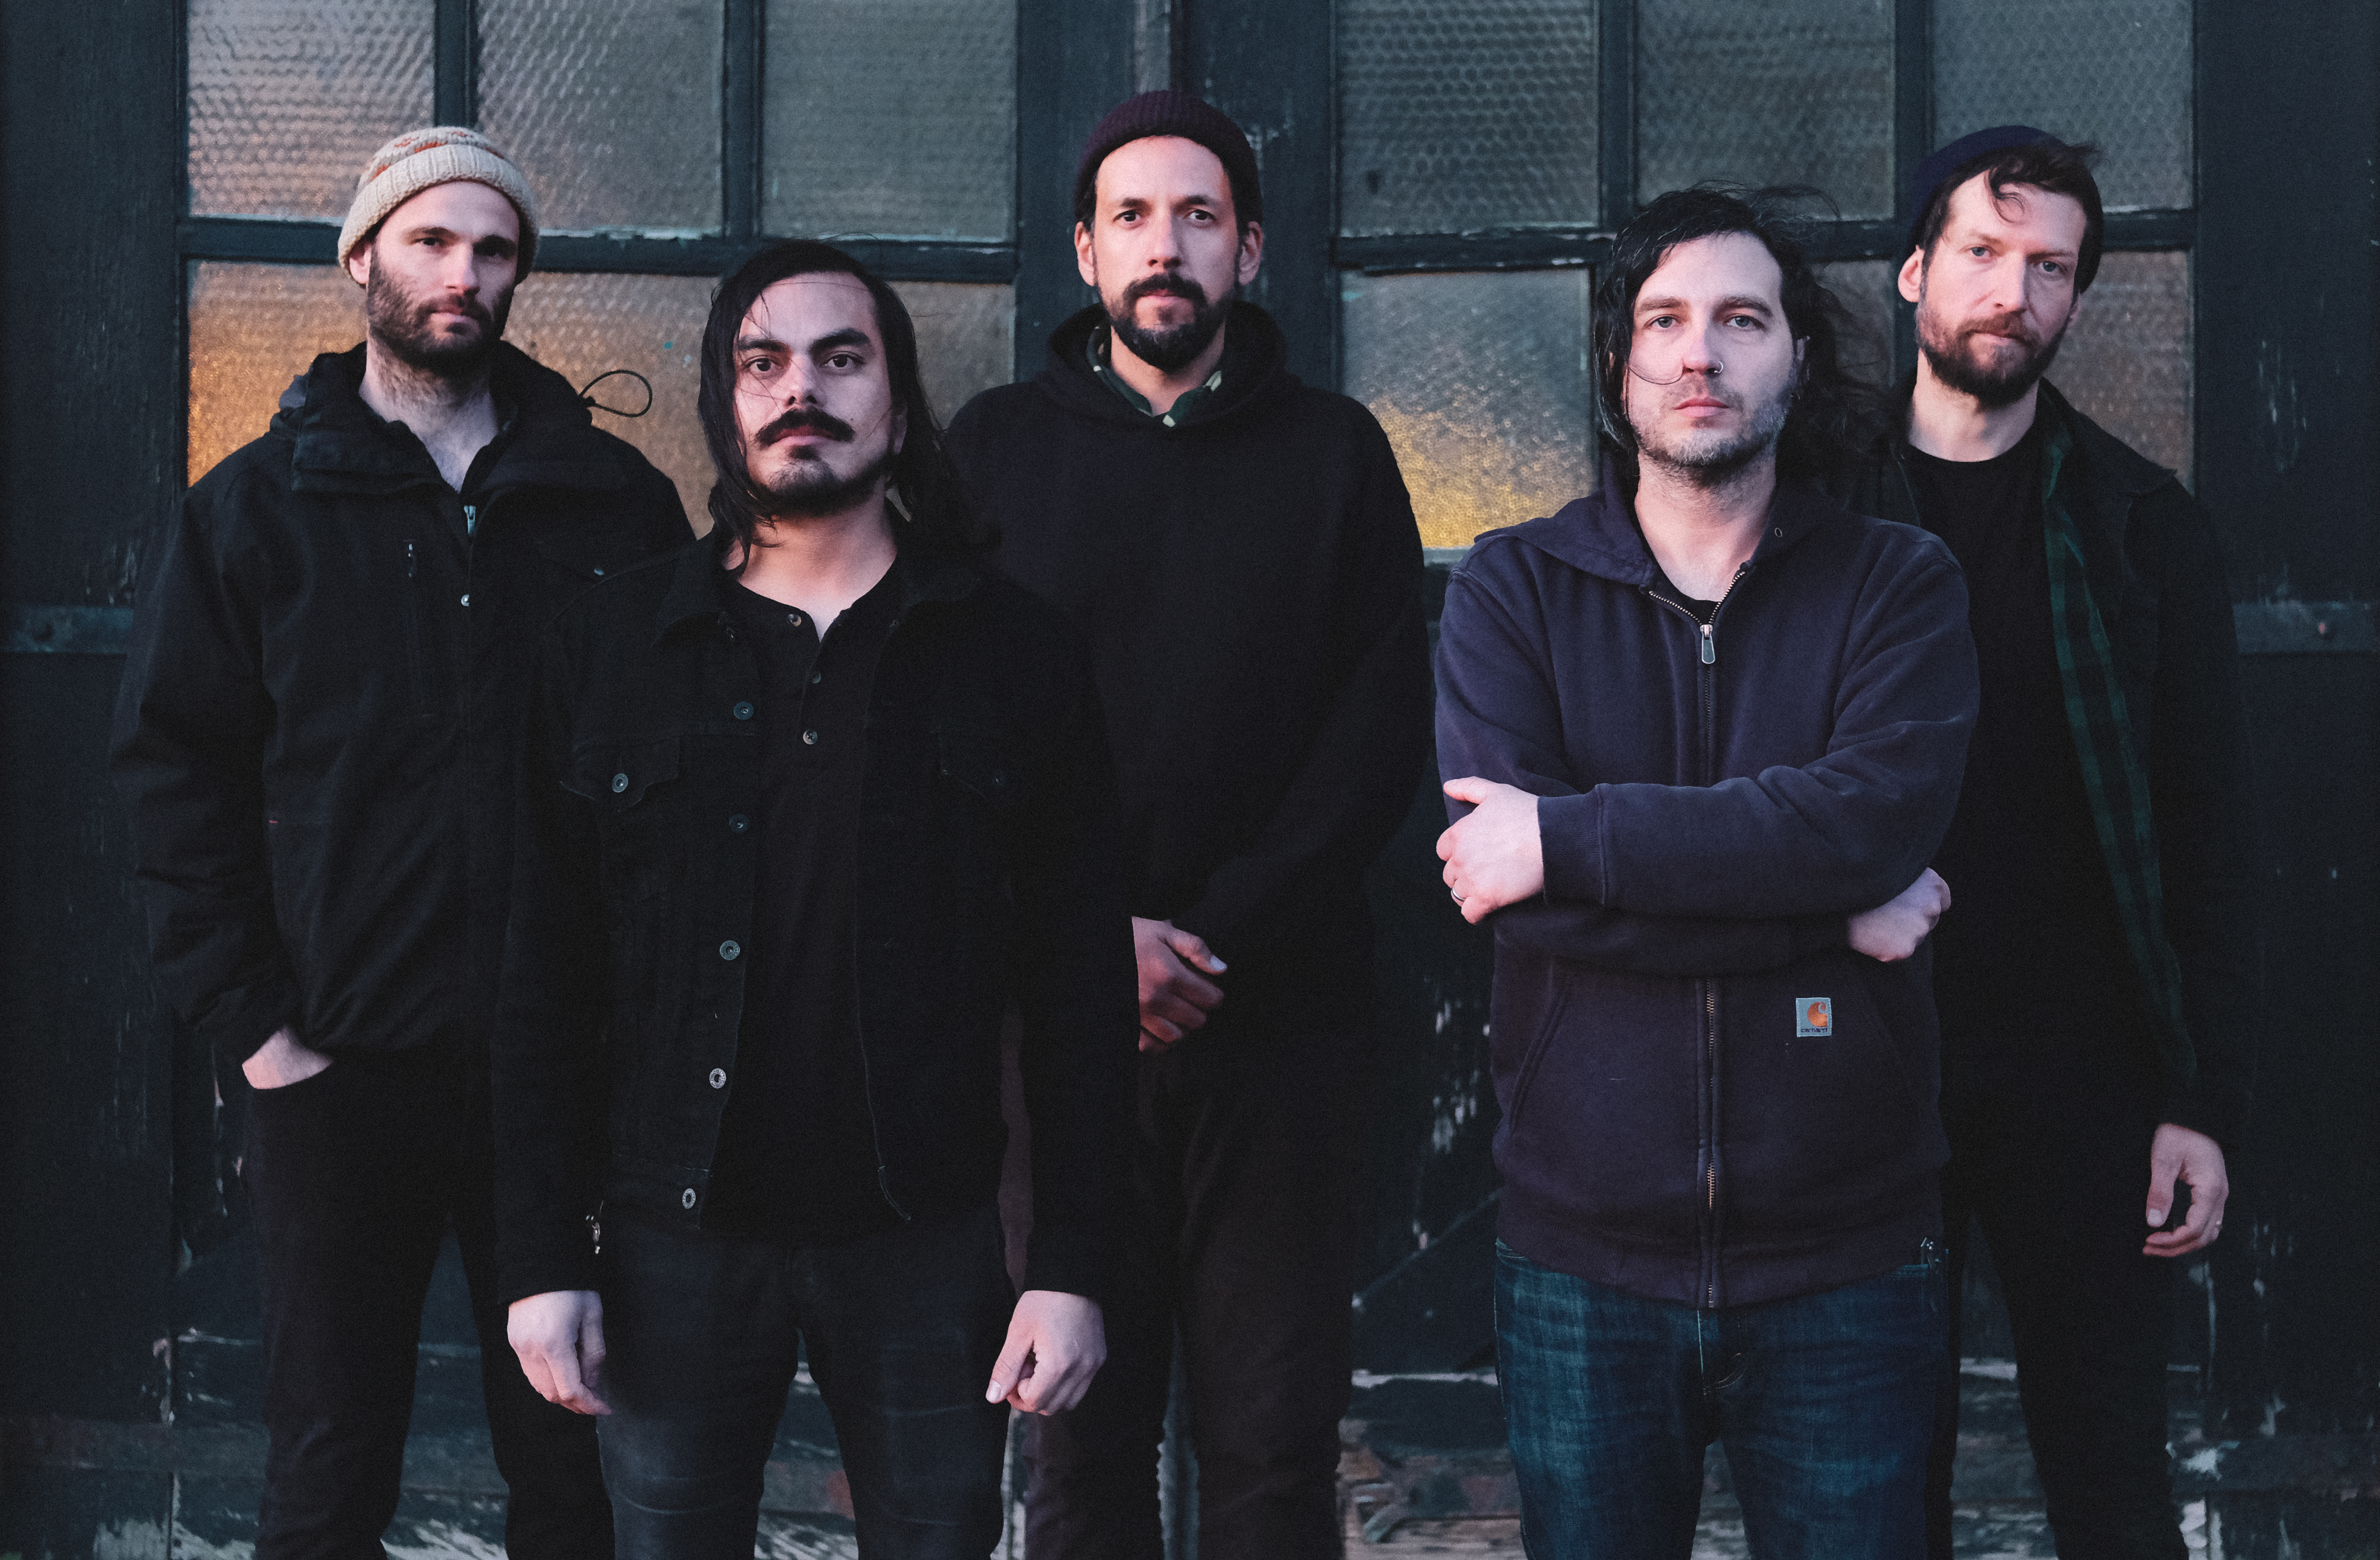 SOM To Release New Full-Length, The Shape Of Everything, January 21st, 2022 Via Pelagic Records; New Video Playing At BrooklynVegan + Preorders Available